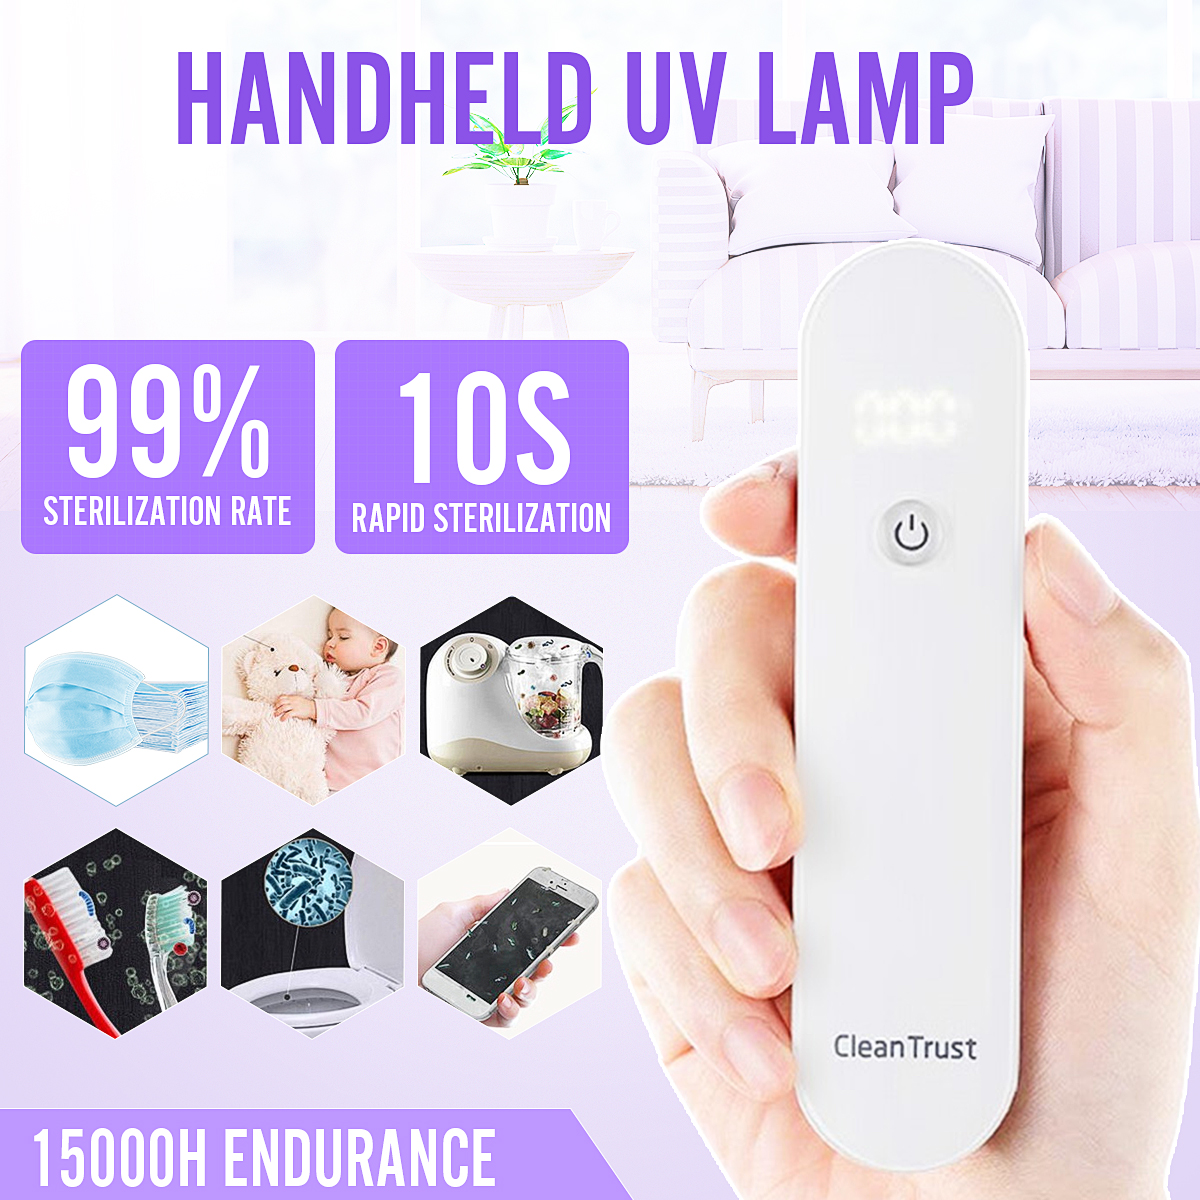 Portable-LED-UV-Sterilizer-Lamp-Disinfection-Handheld-For-Phones-Clothes-Bedding-1670454-2